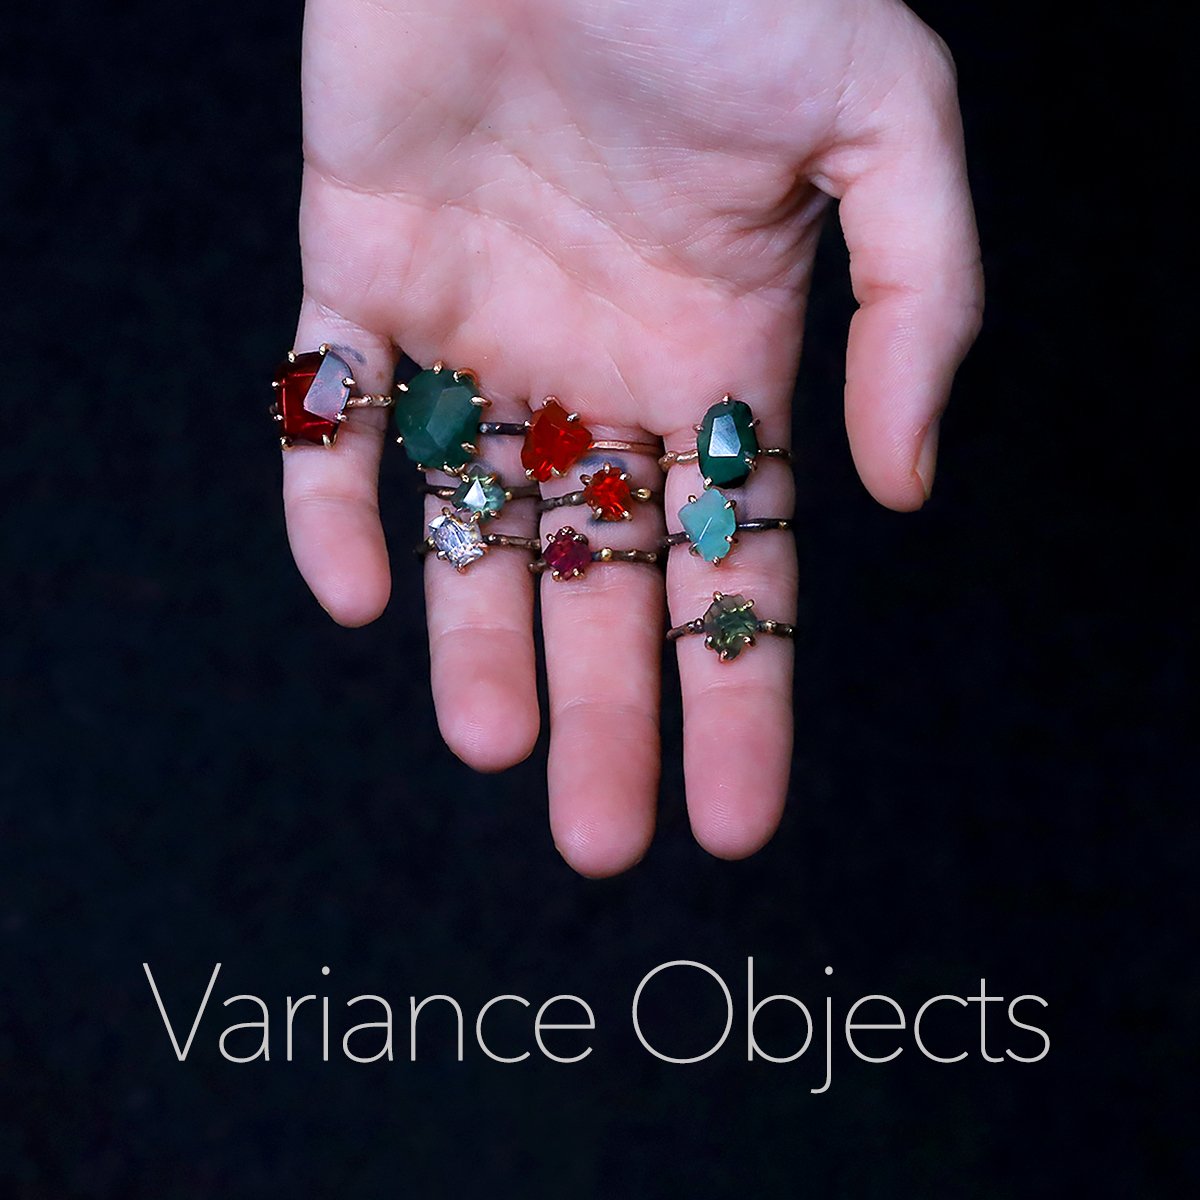 variance_objects02 copy.jpg